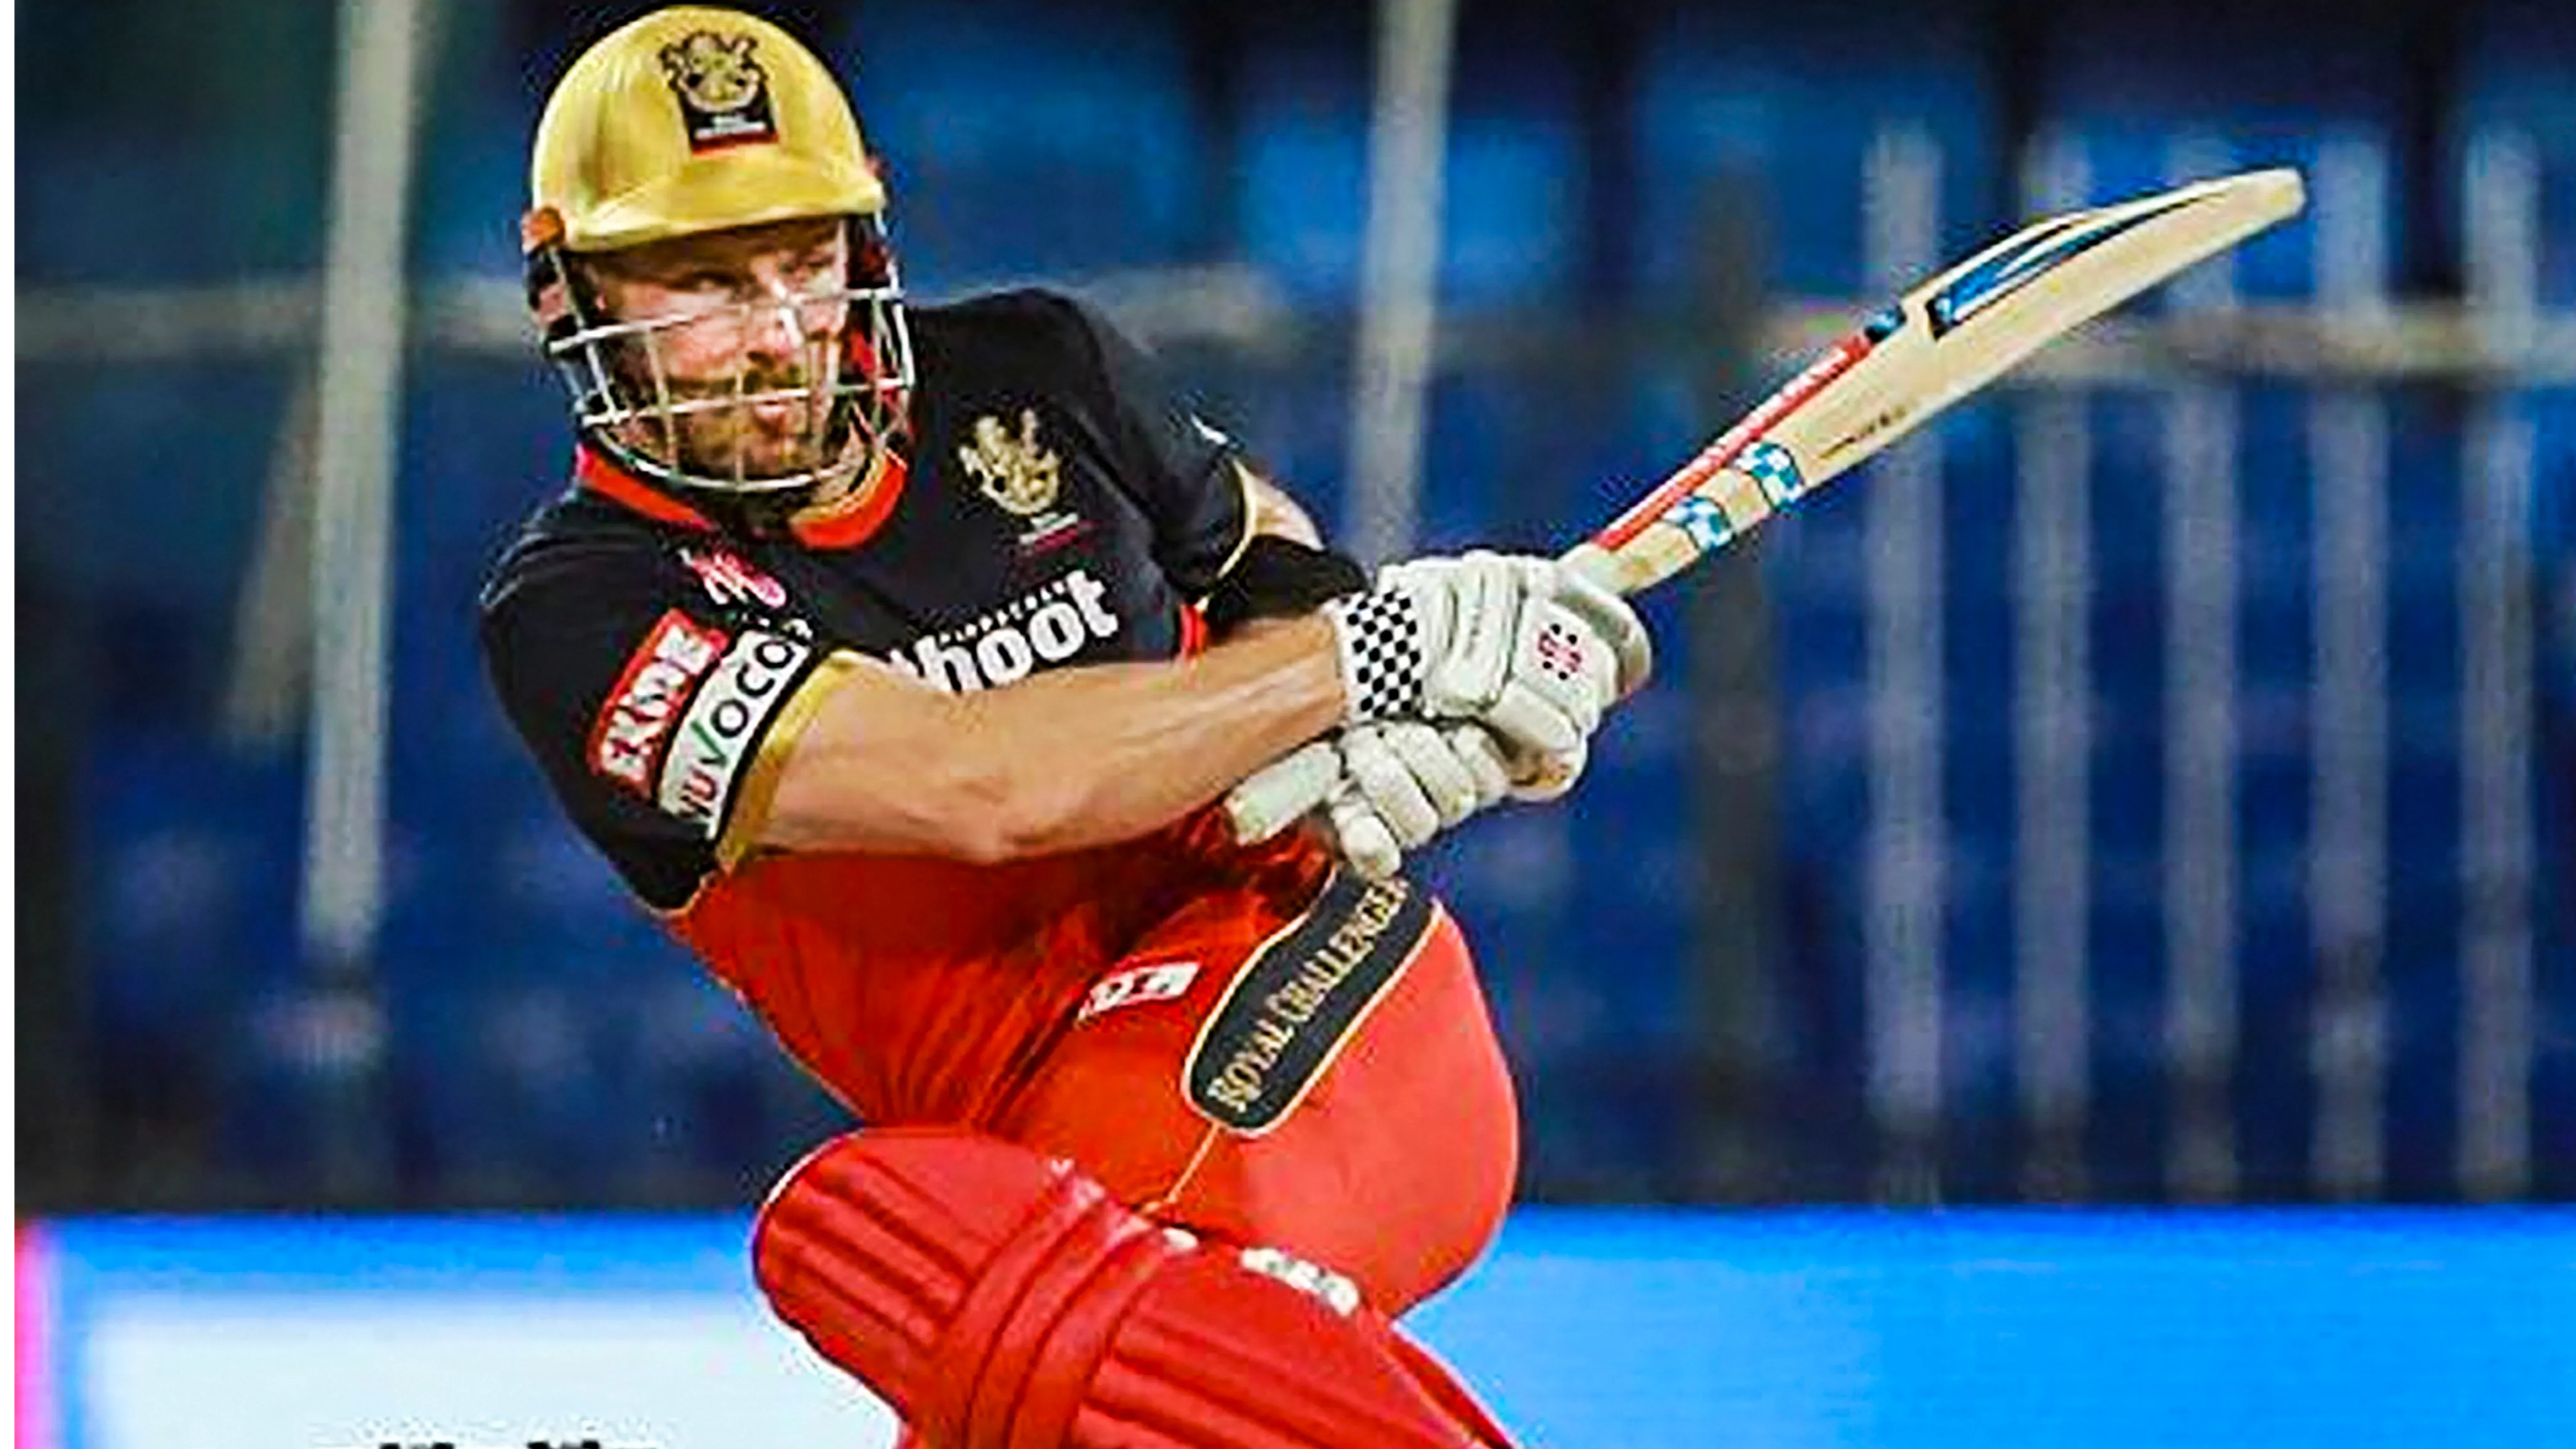 Aaron Finch misses out on record ninth IPL franchise, goes unsold at IPL 2021 auction